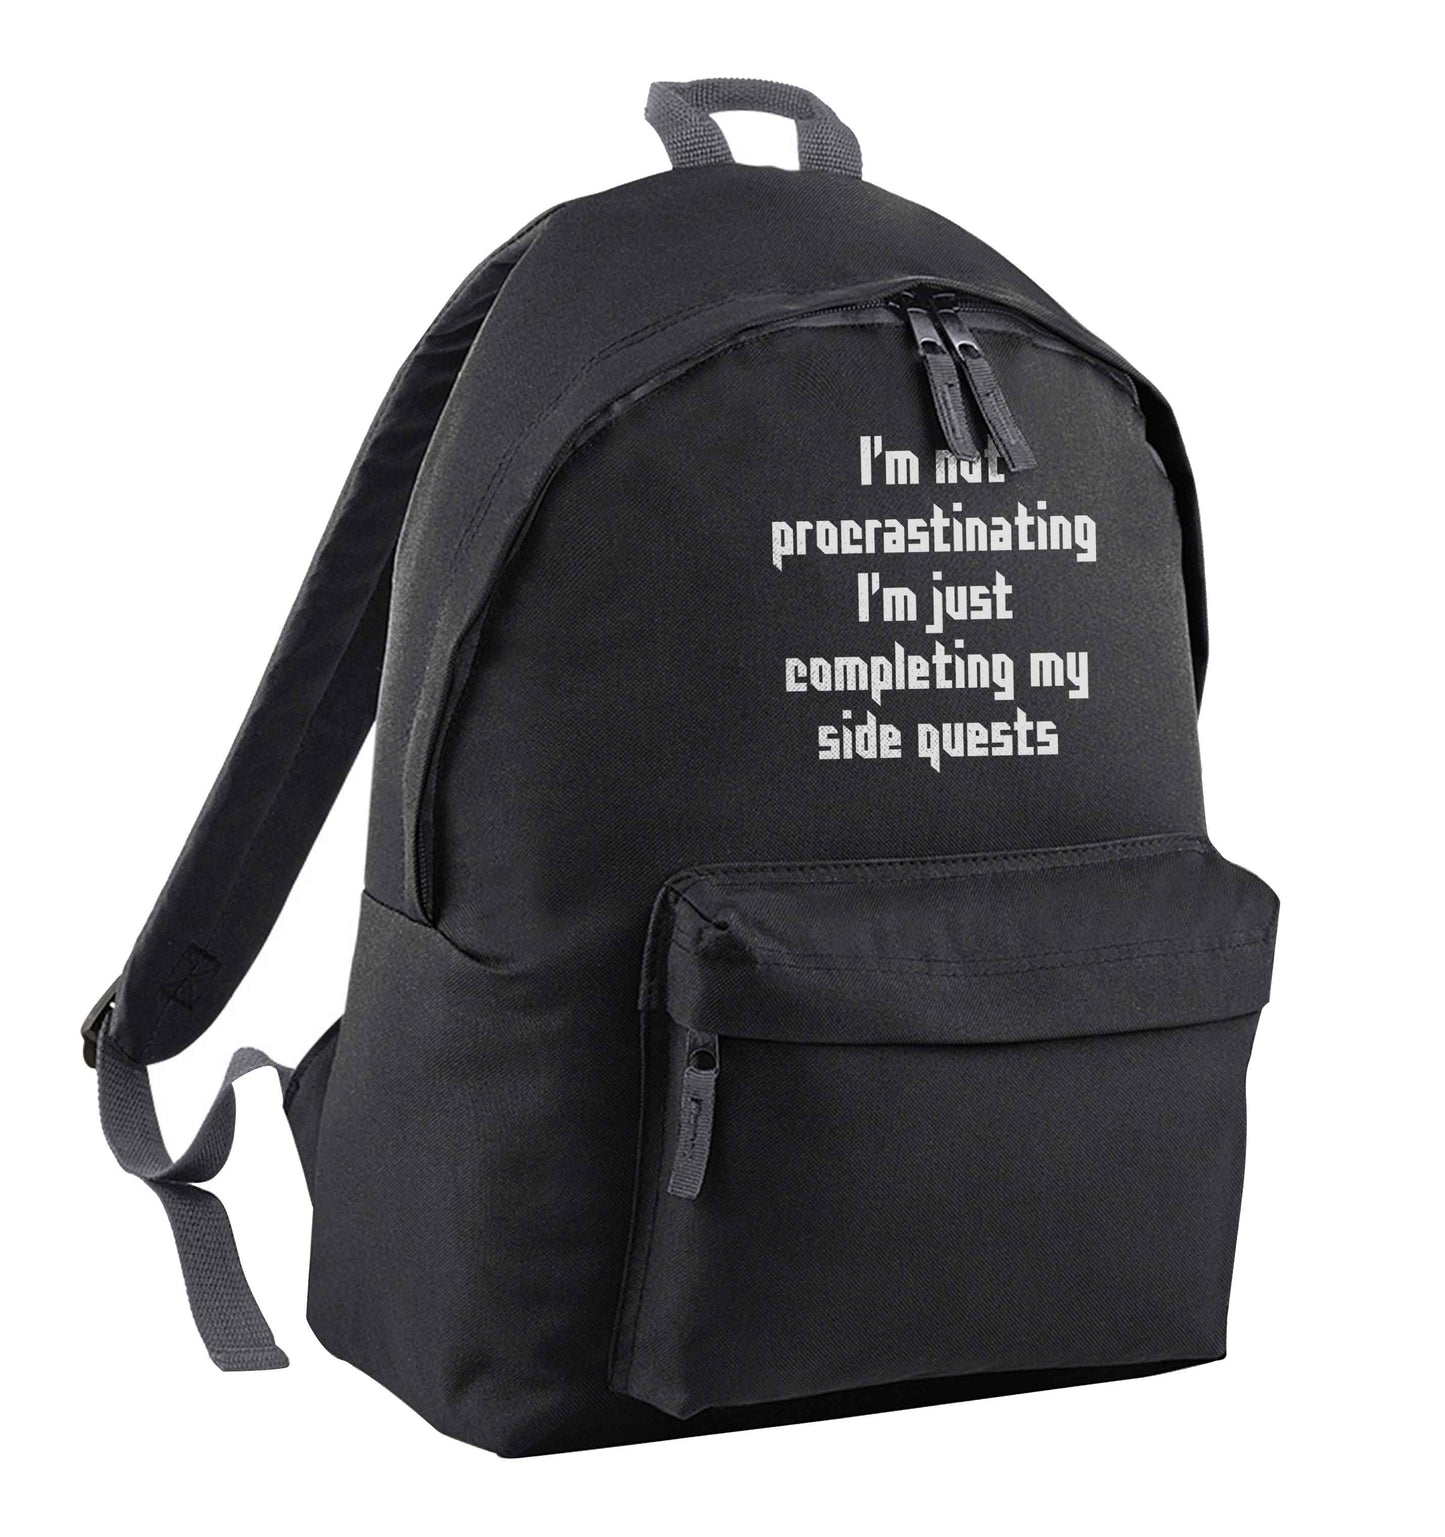 I'm not procrastinating I'm just completing my side quests black adults backpack